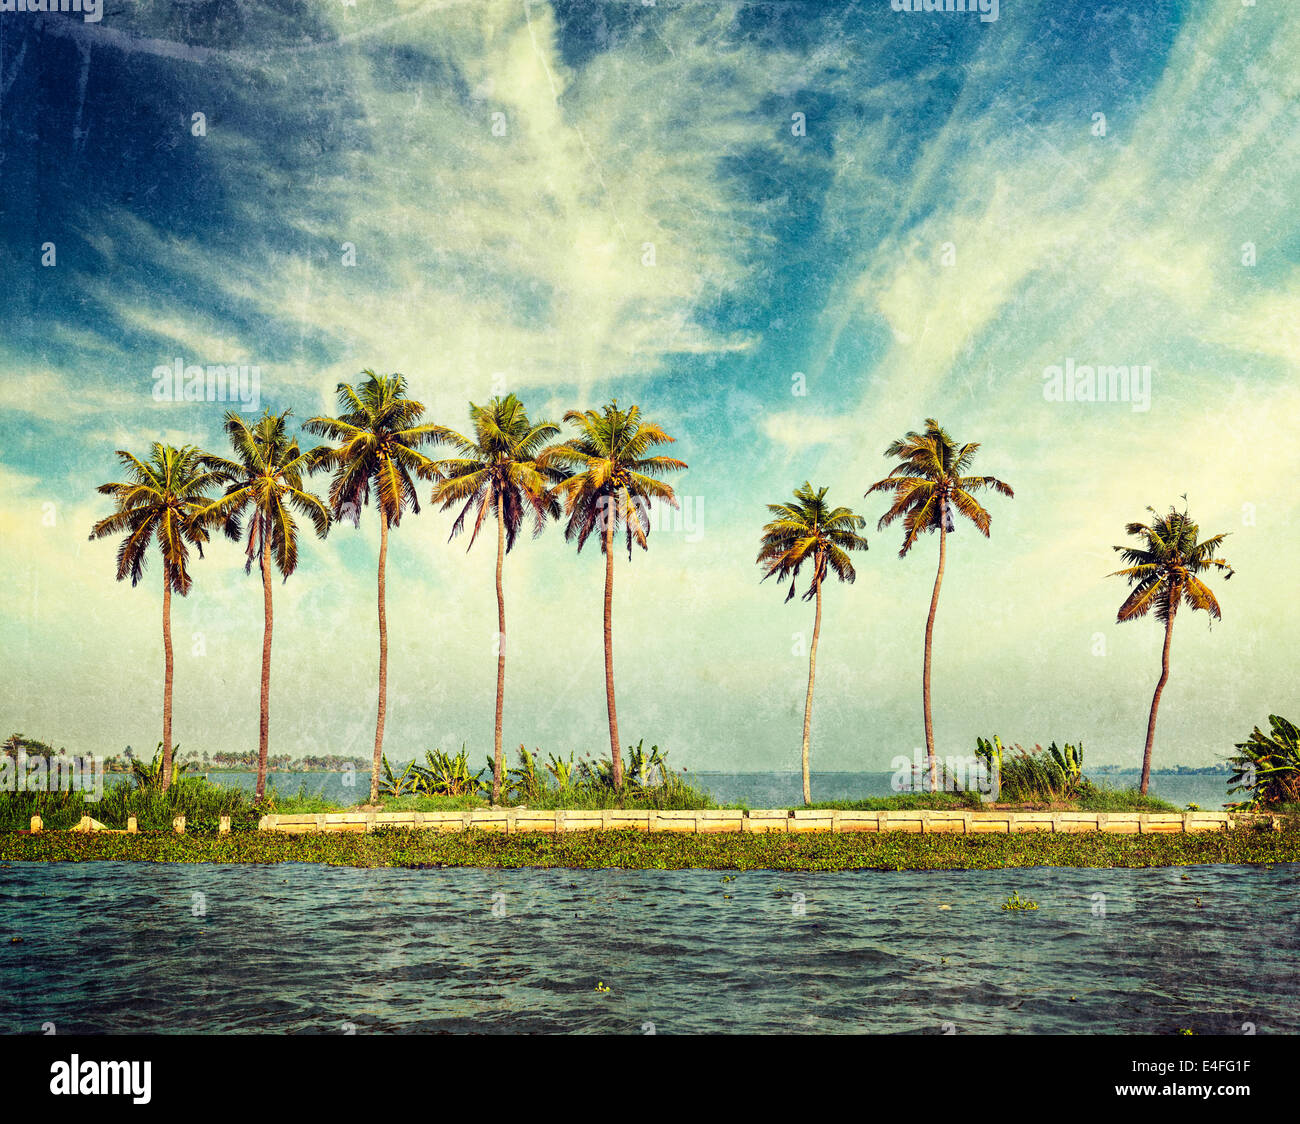 Vintage retro hipster style travel image of palms at Kerala backwaters with grunge texture overlaid. Kerala, India Stock Photo